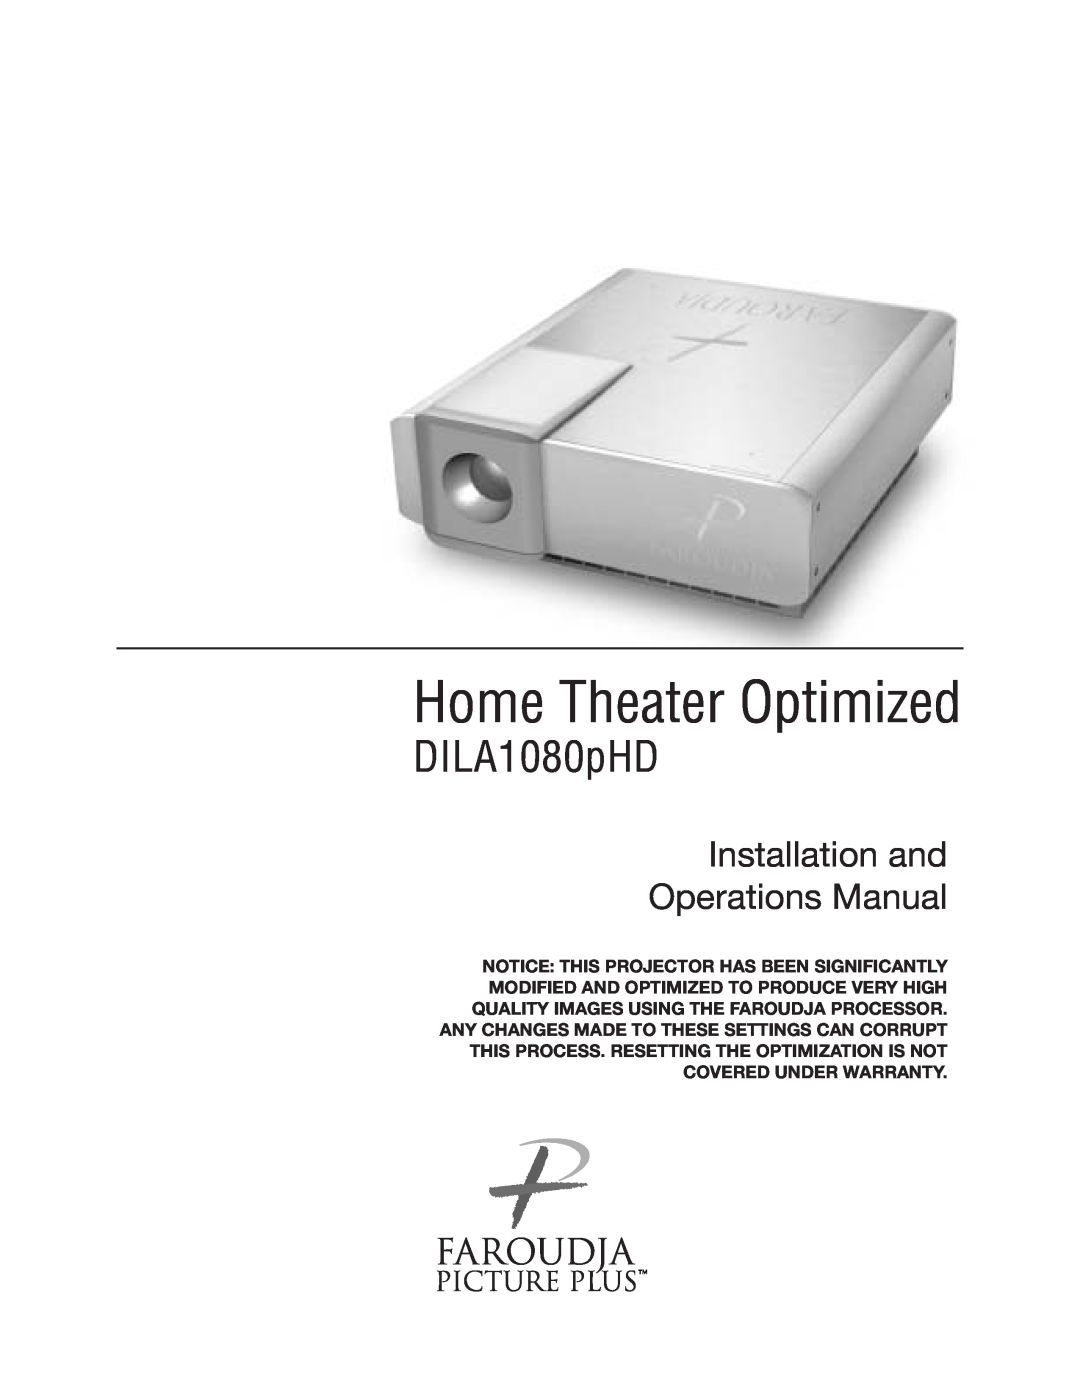 Meridian Audio DILA1080pHD warranty Home Theater Optimized, Installation and Operations Manual 